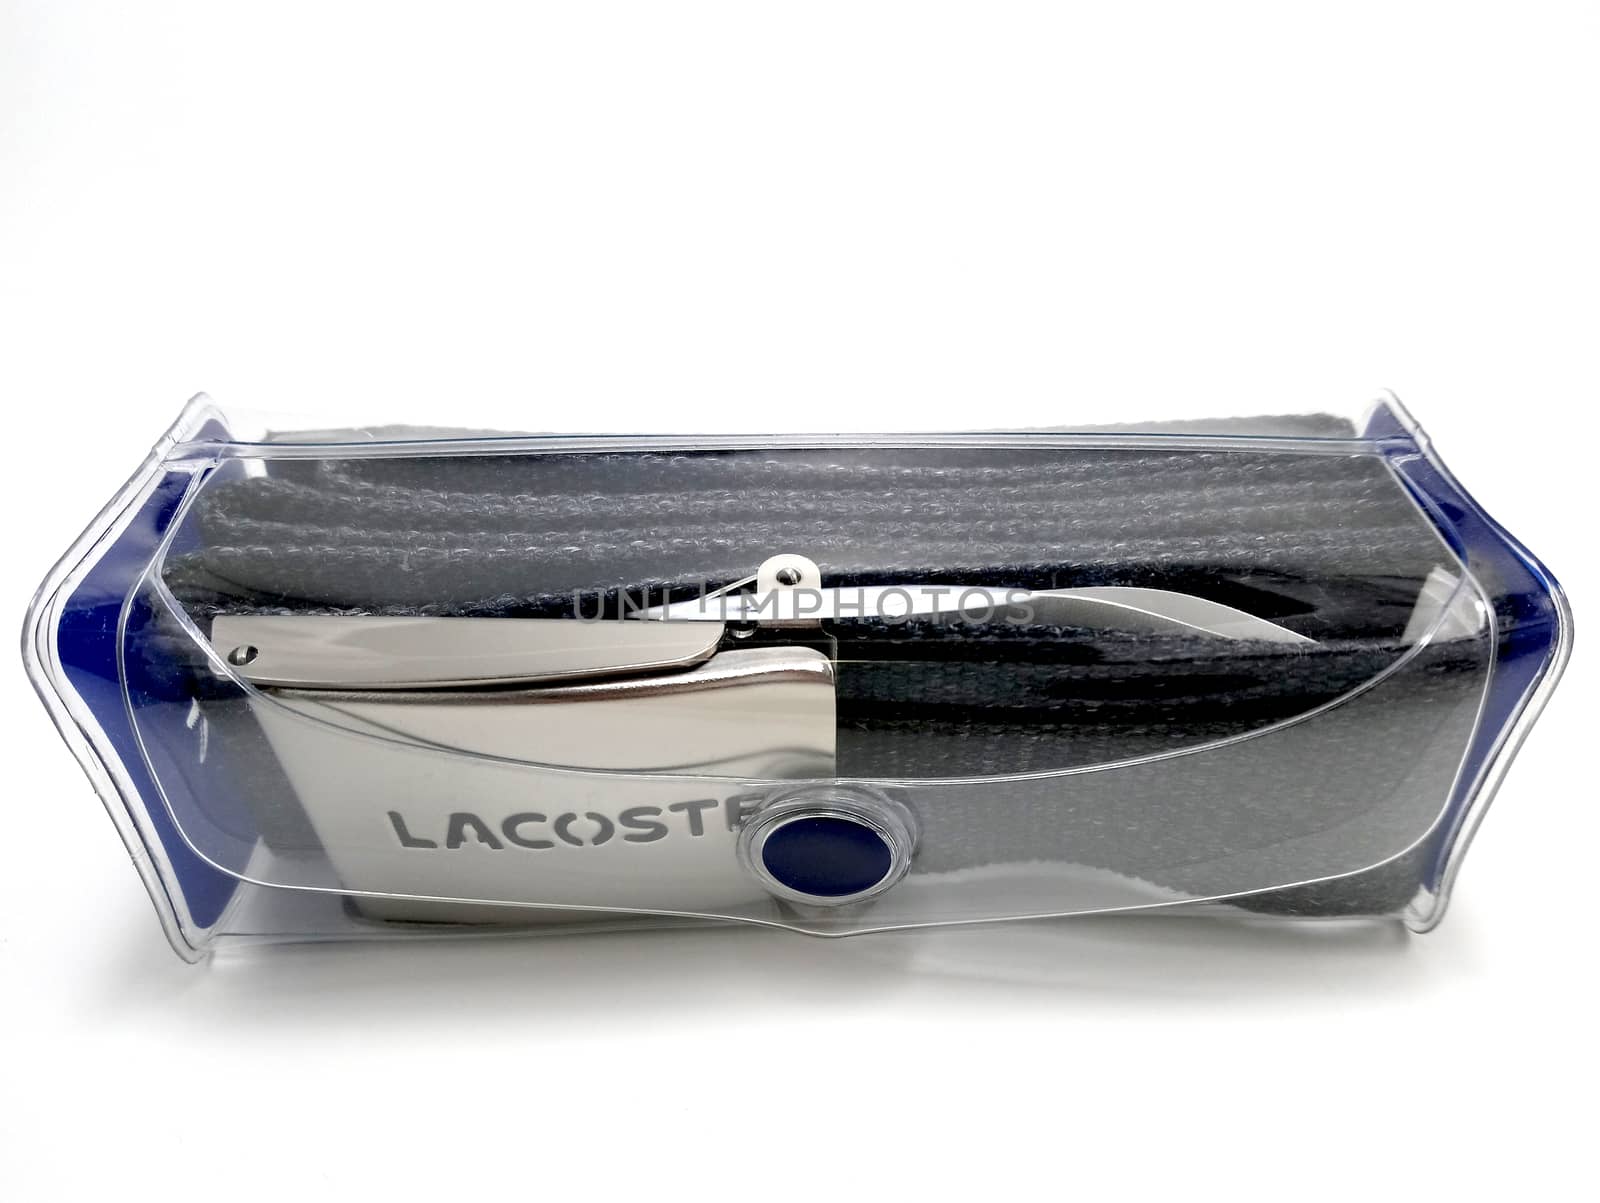 iLacoste navy blue belt strap and buckle in Manila, Philippines by imwaltersy